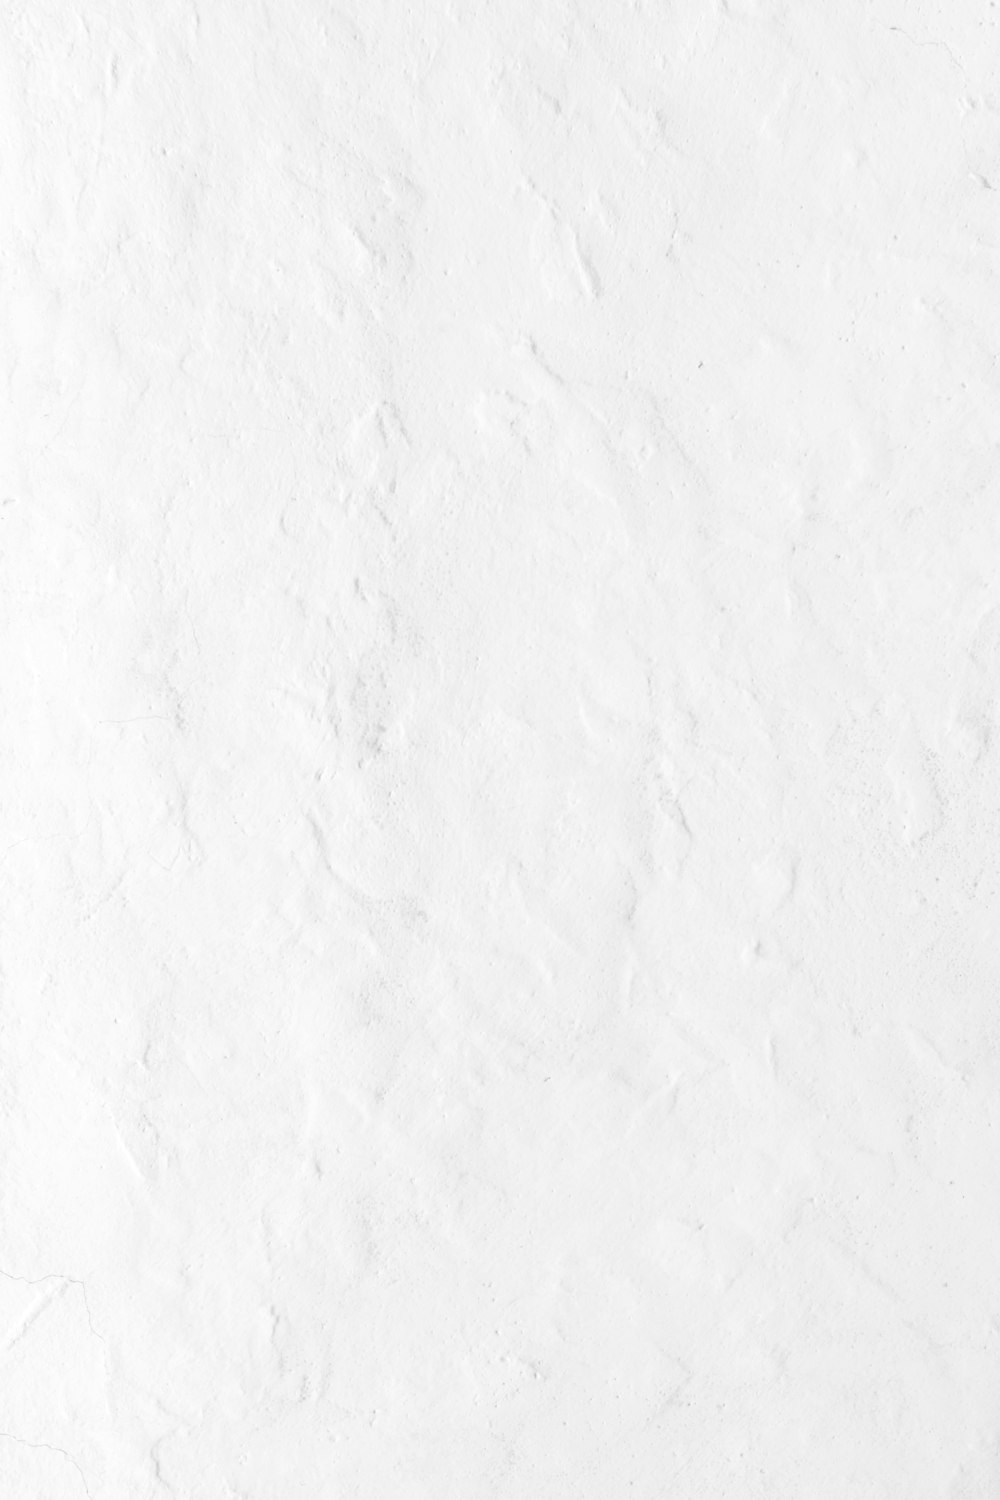 500+ White Paper Pictures [HQ] | Download Free Images on Unsplash